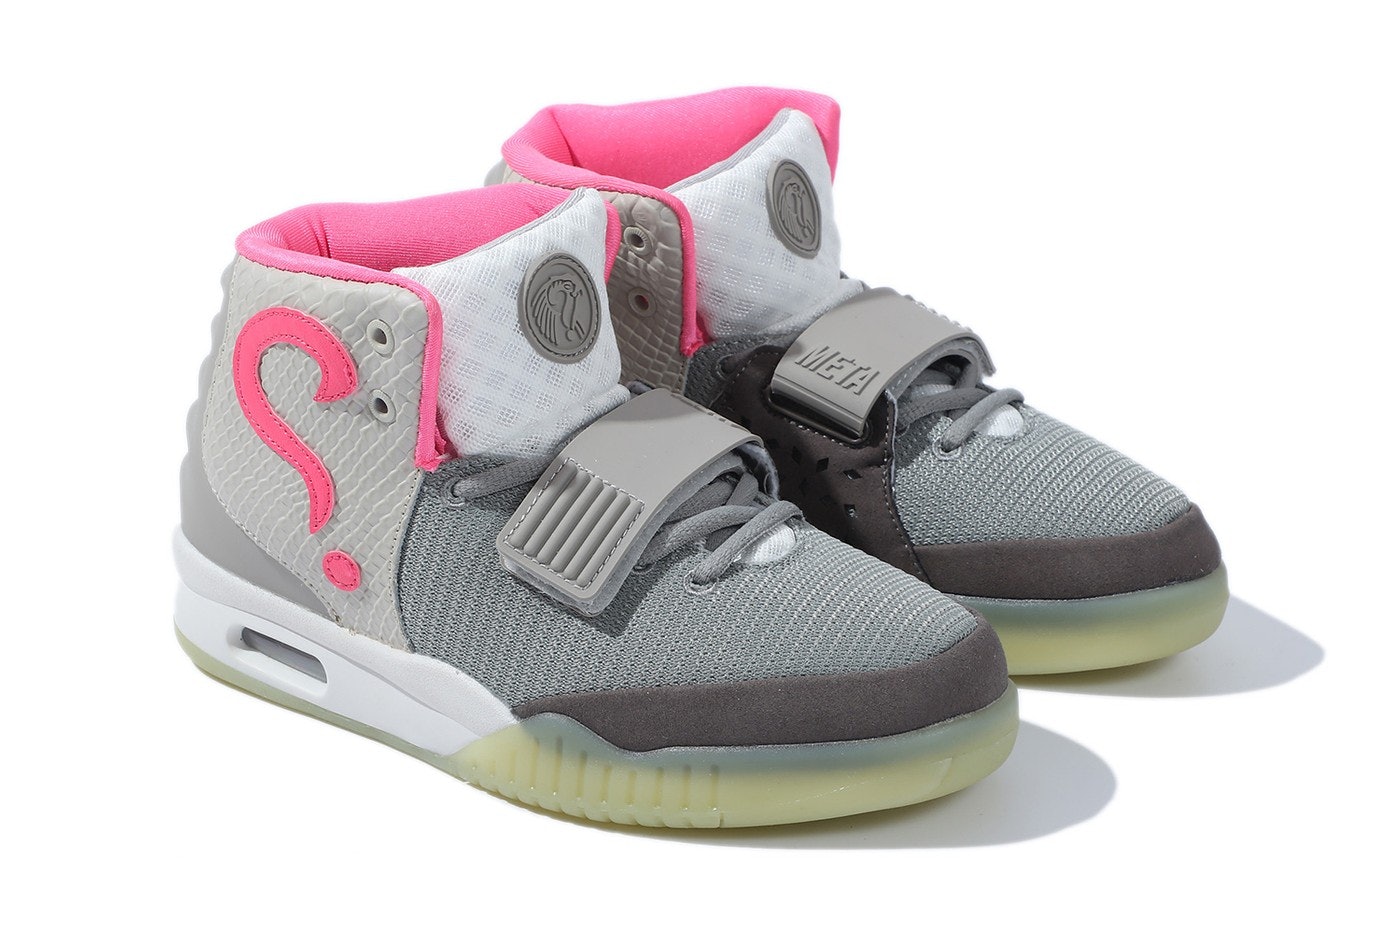 A new shoe brand ripped off Kanye's iconic Nike Air Yeezy 2 sneakers